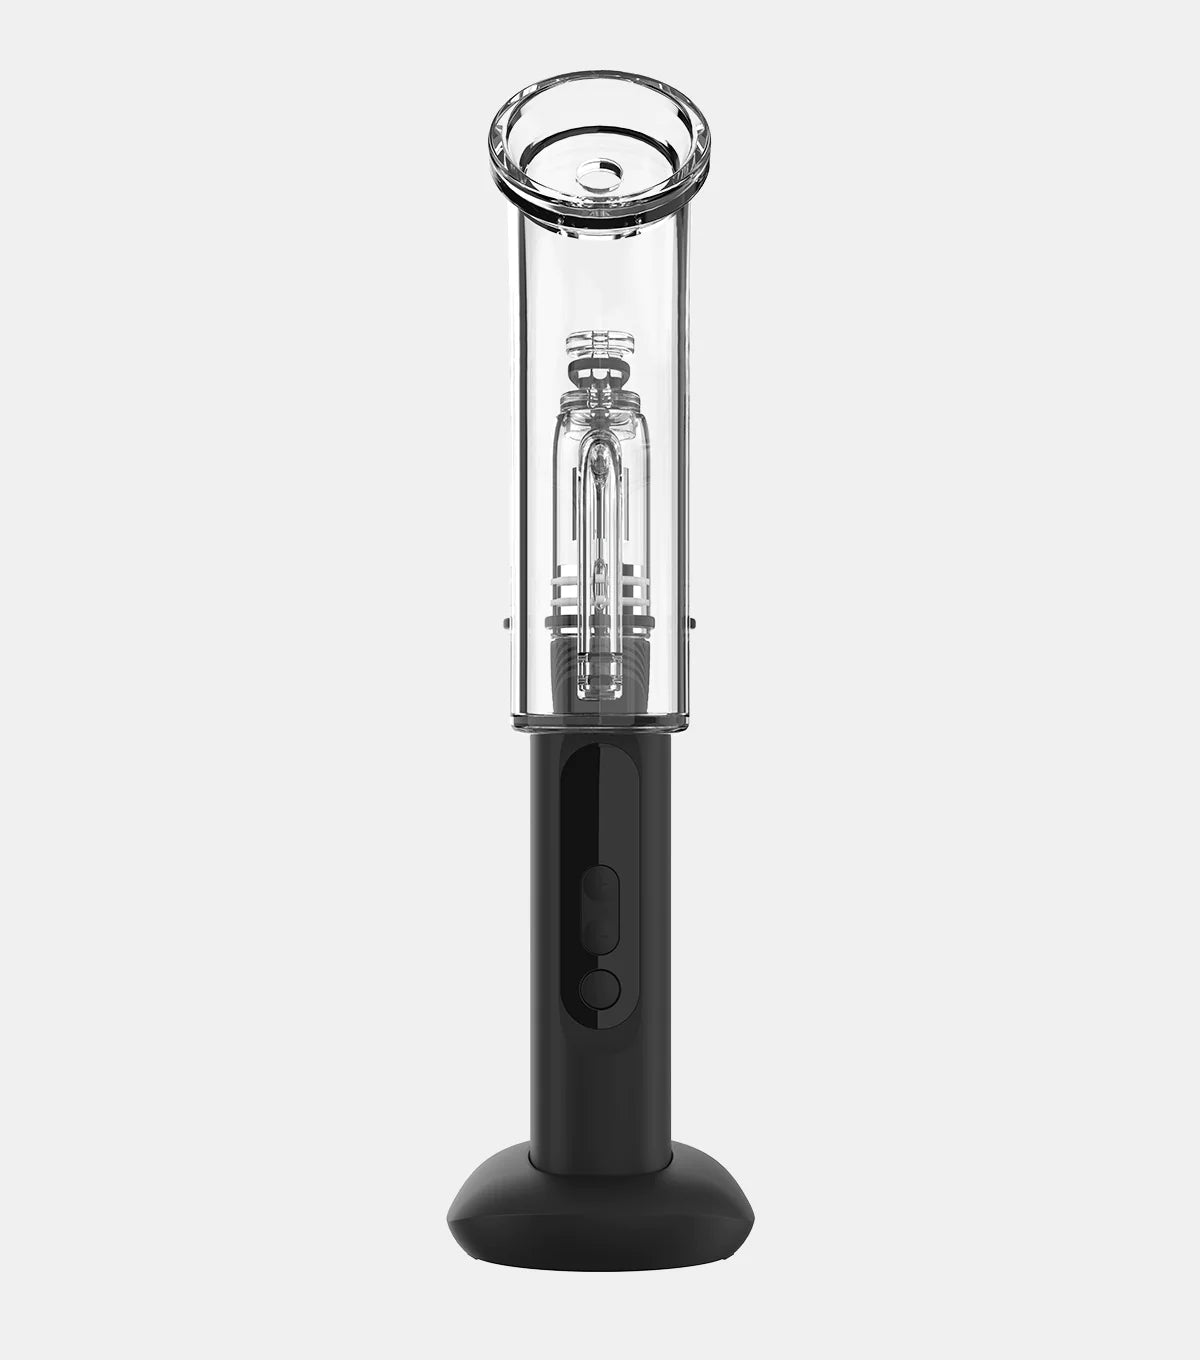 AUXO Cira Vaporizer for Concentrate in black, portable design with clear borosilicate glass, front view